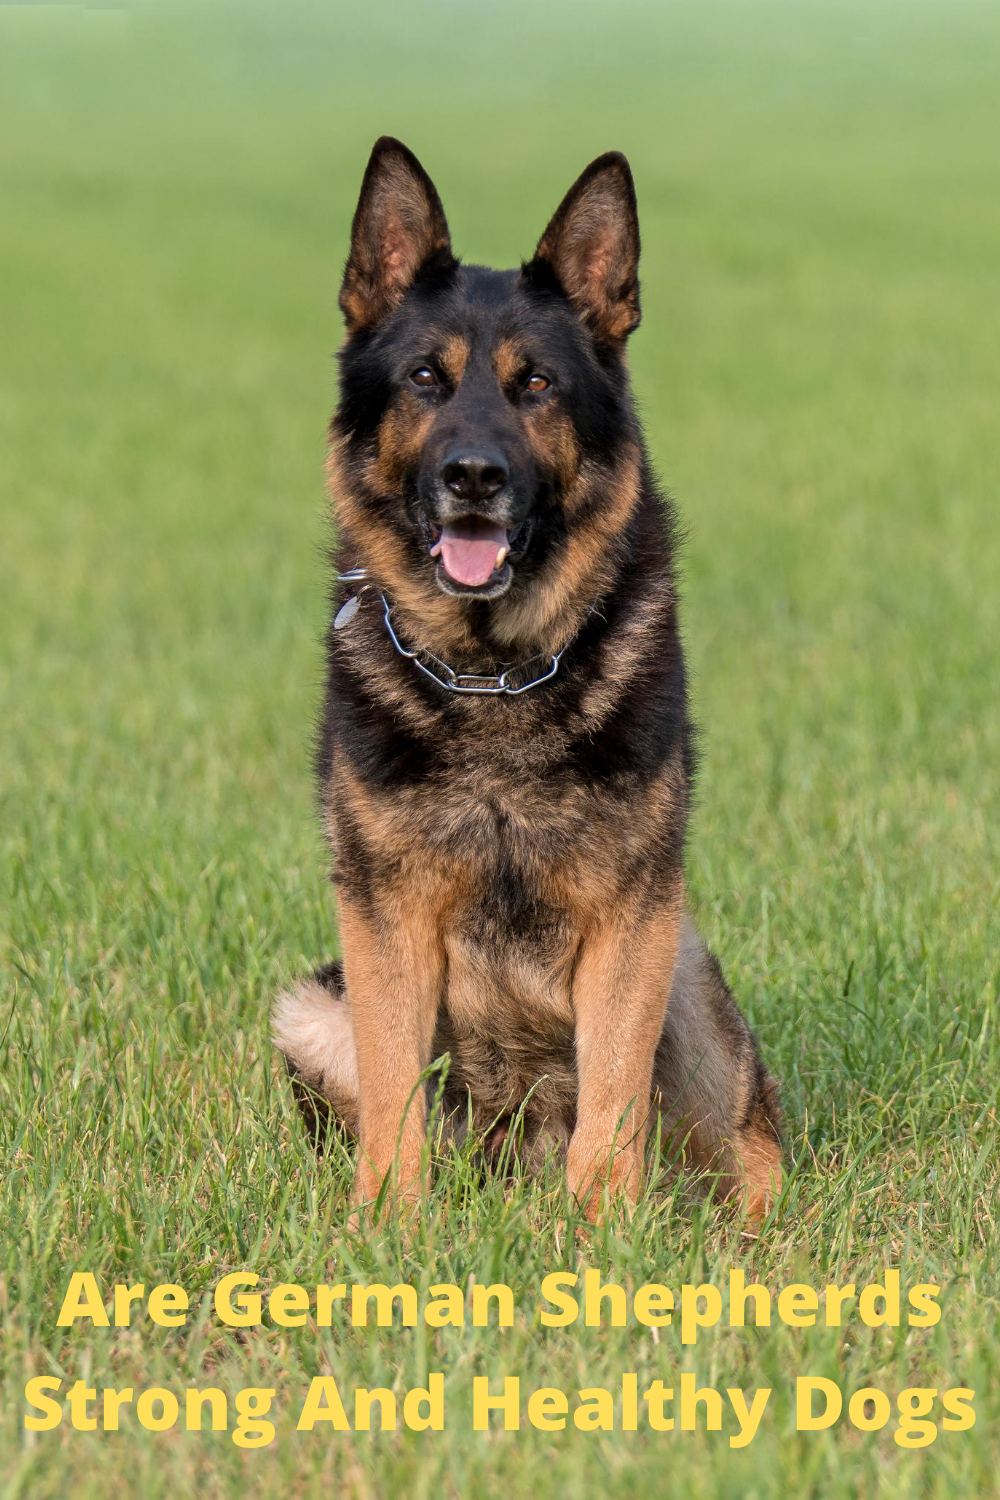 Are German Shepherds Strong And Healthy Dogs?